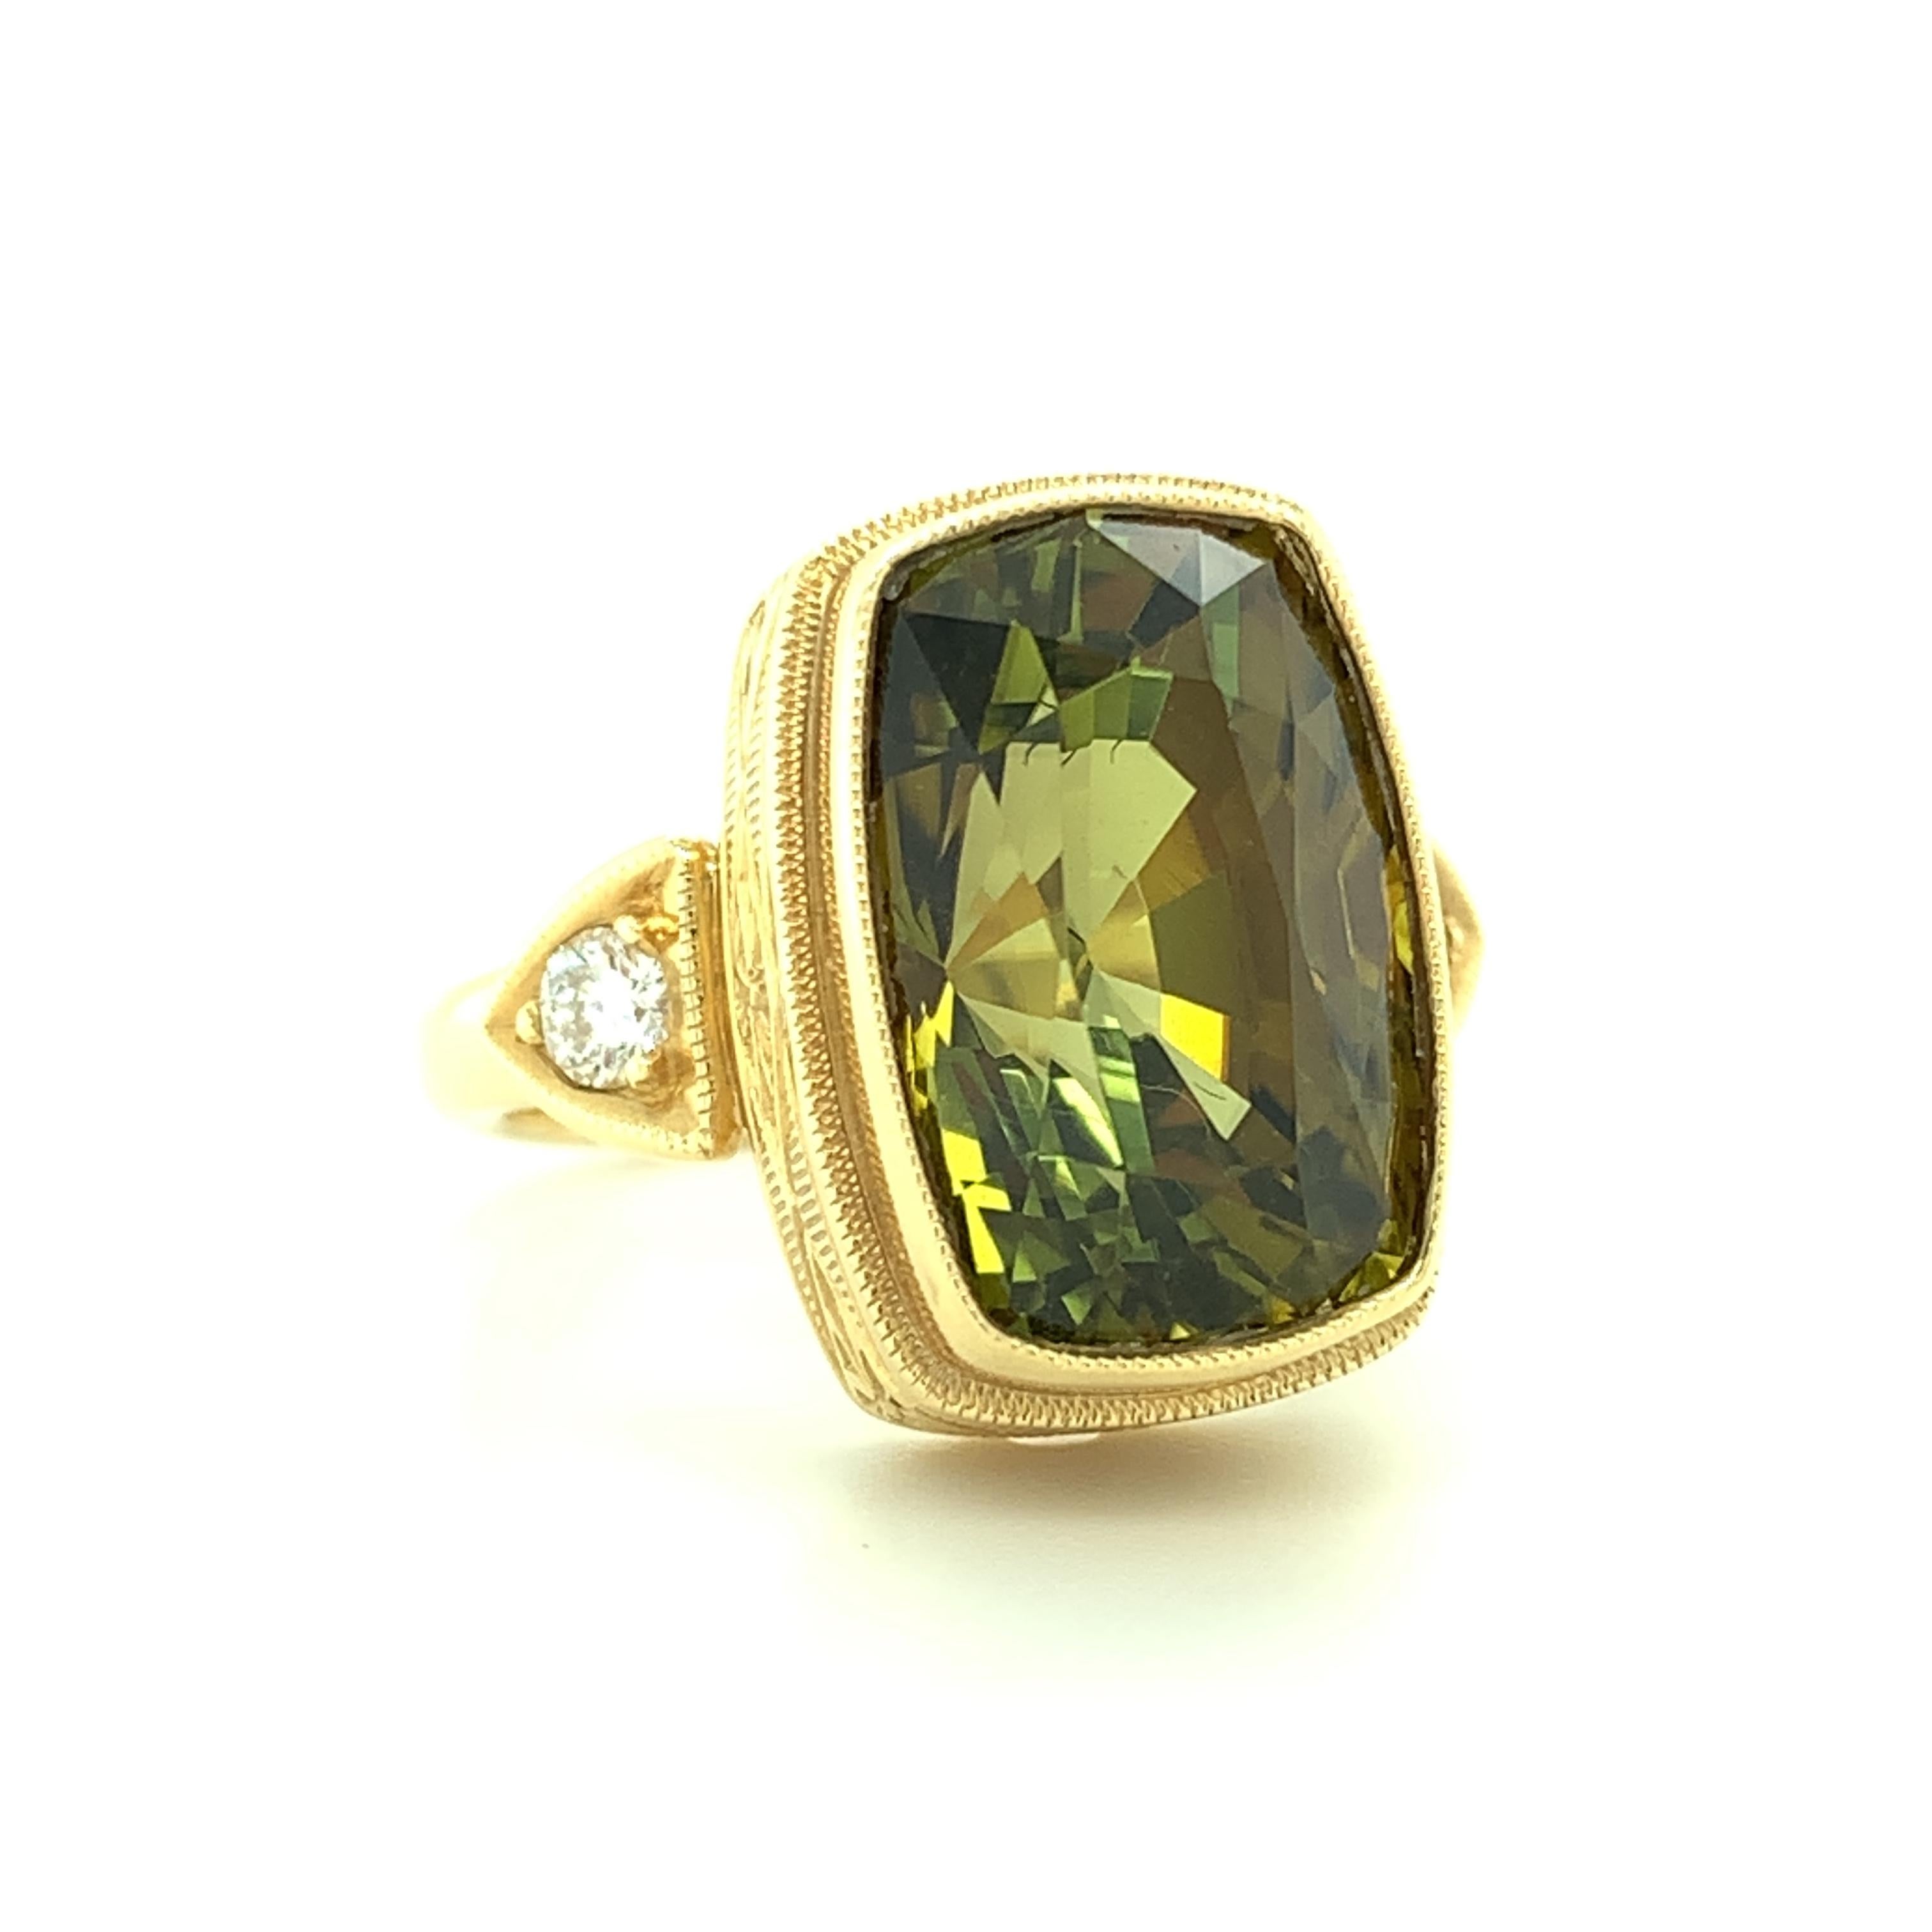 This gorgeous ring features a rich, 6.75 carat, elongated cushion cut olive tourmaline that has been set in a handmade 18k yellow gold bezel. We designed this style to showcase gorgeous gemstones like this one, whose highly polished facets reflect a